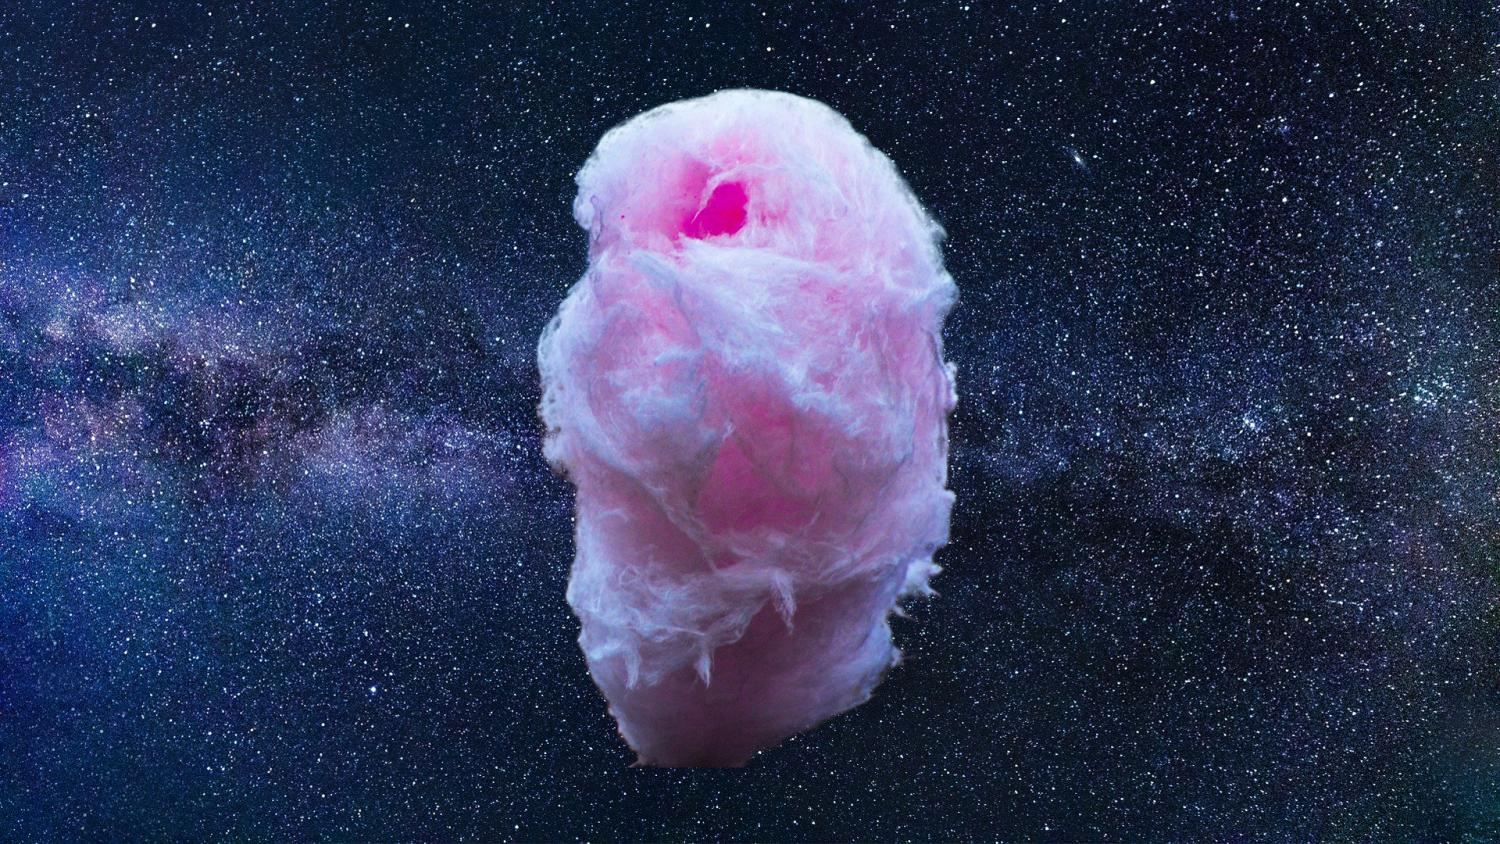 Cotton candy in space.